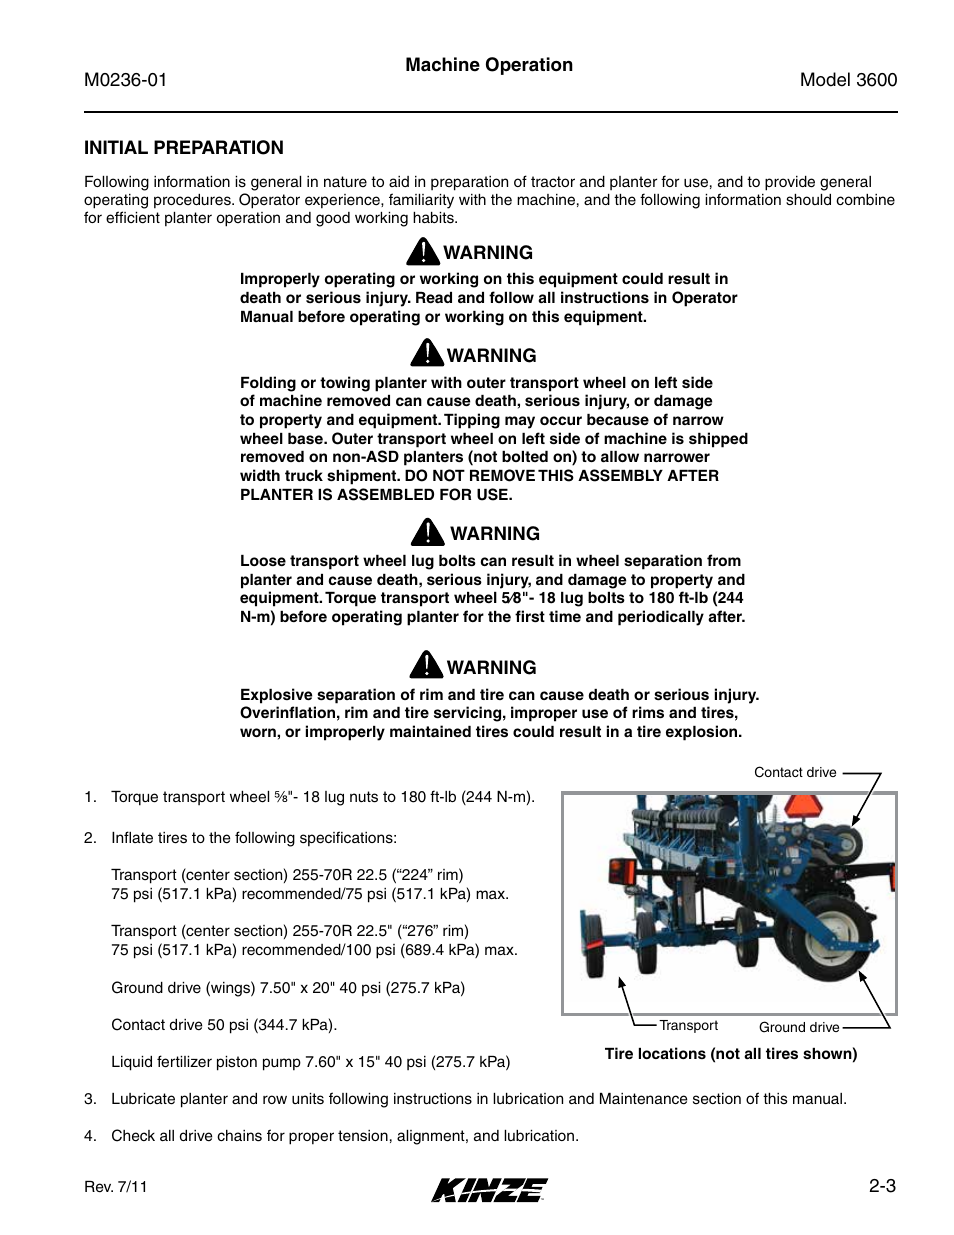 Initial preparation, Initial preparation -3 | Kinze 3600 Lift and Rotate Planter Rev. 7/14 User Manual | Page 13 / 172